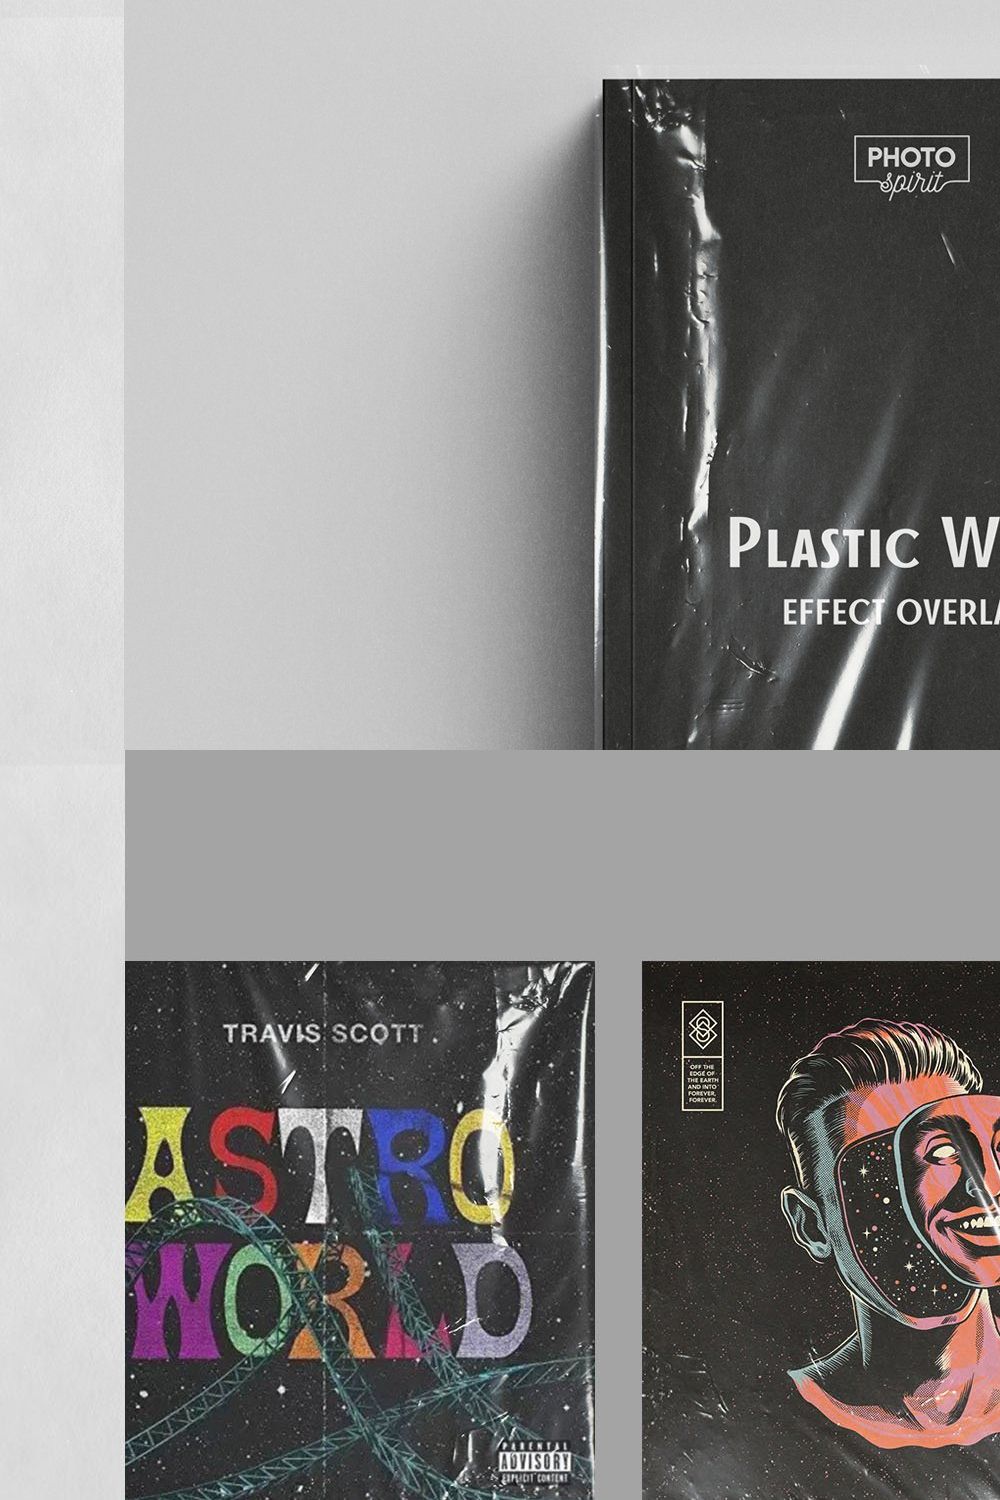 Plastic Wrap Effect Overlays pinterest preview image.